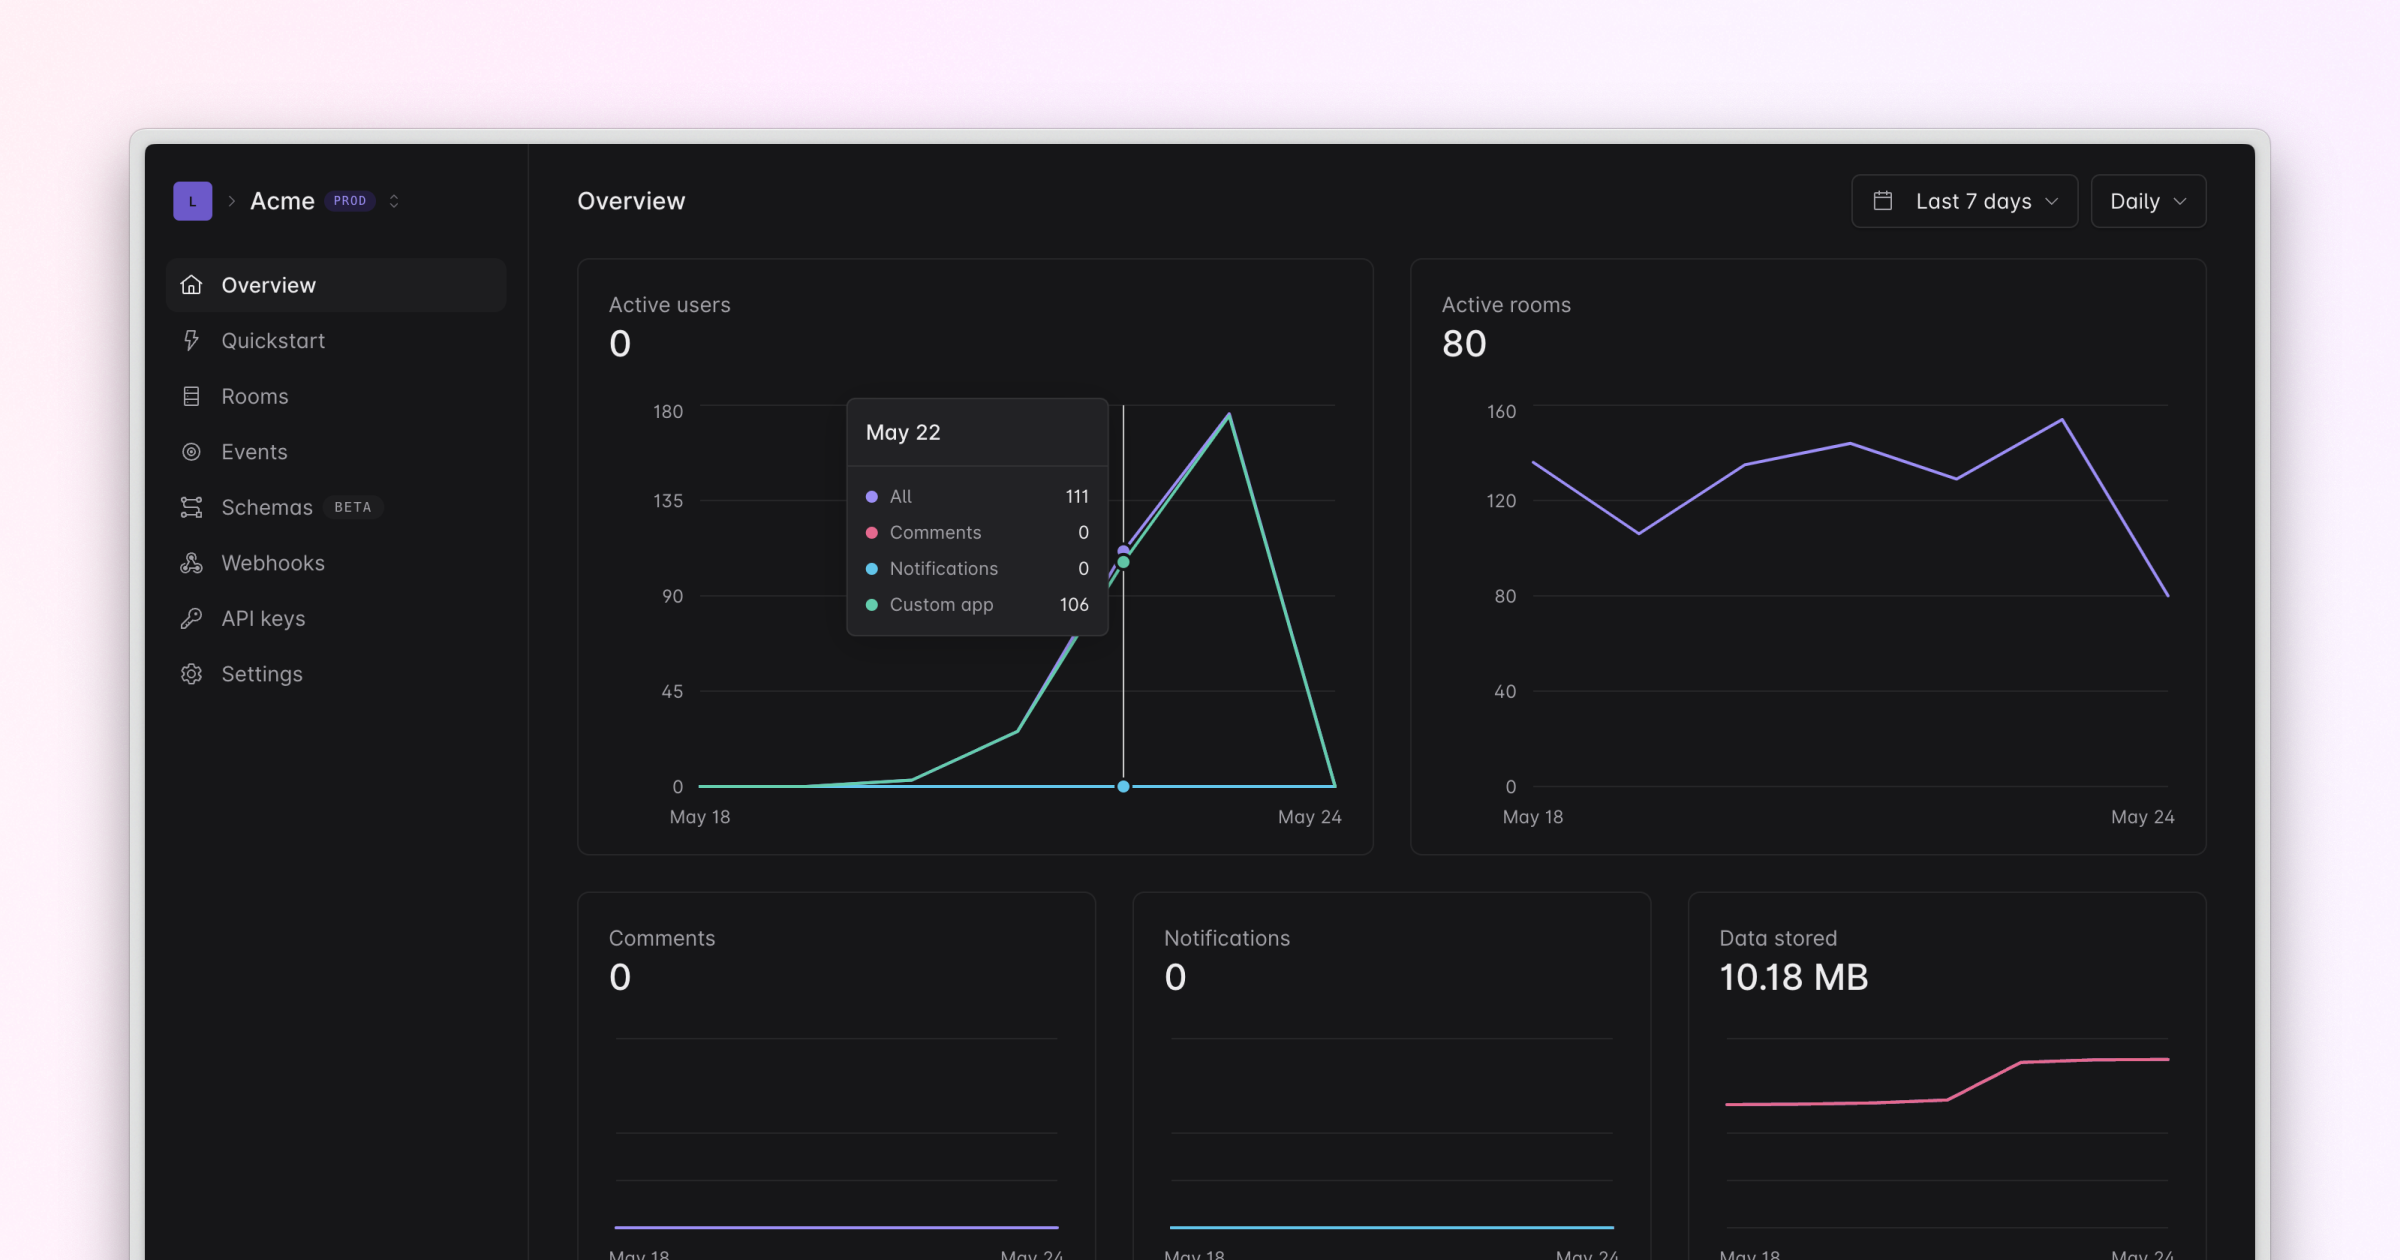 New analytics on the dashboard index page